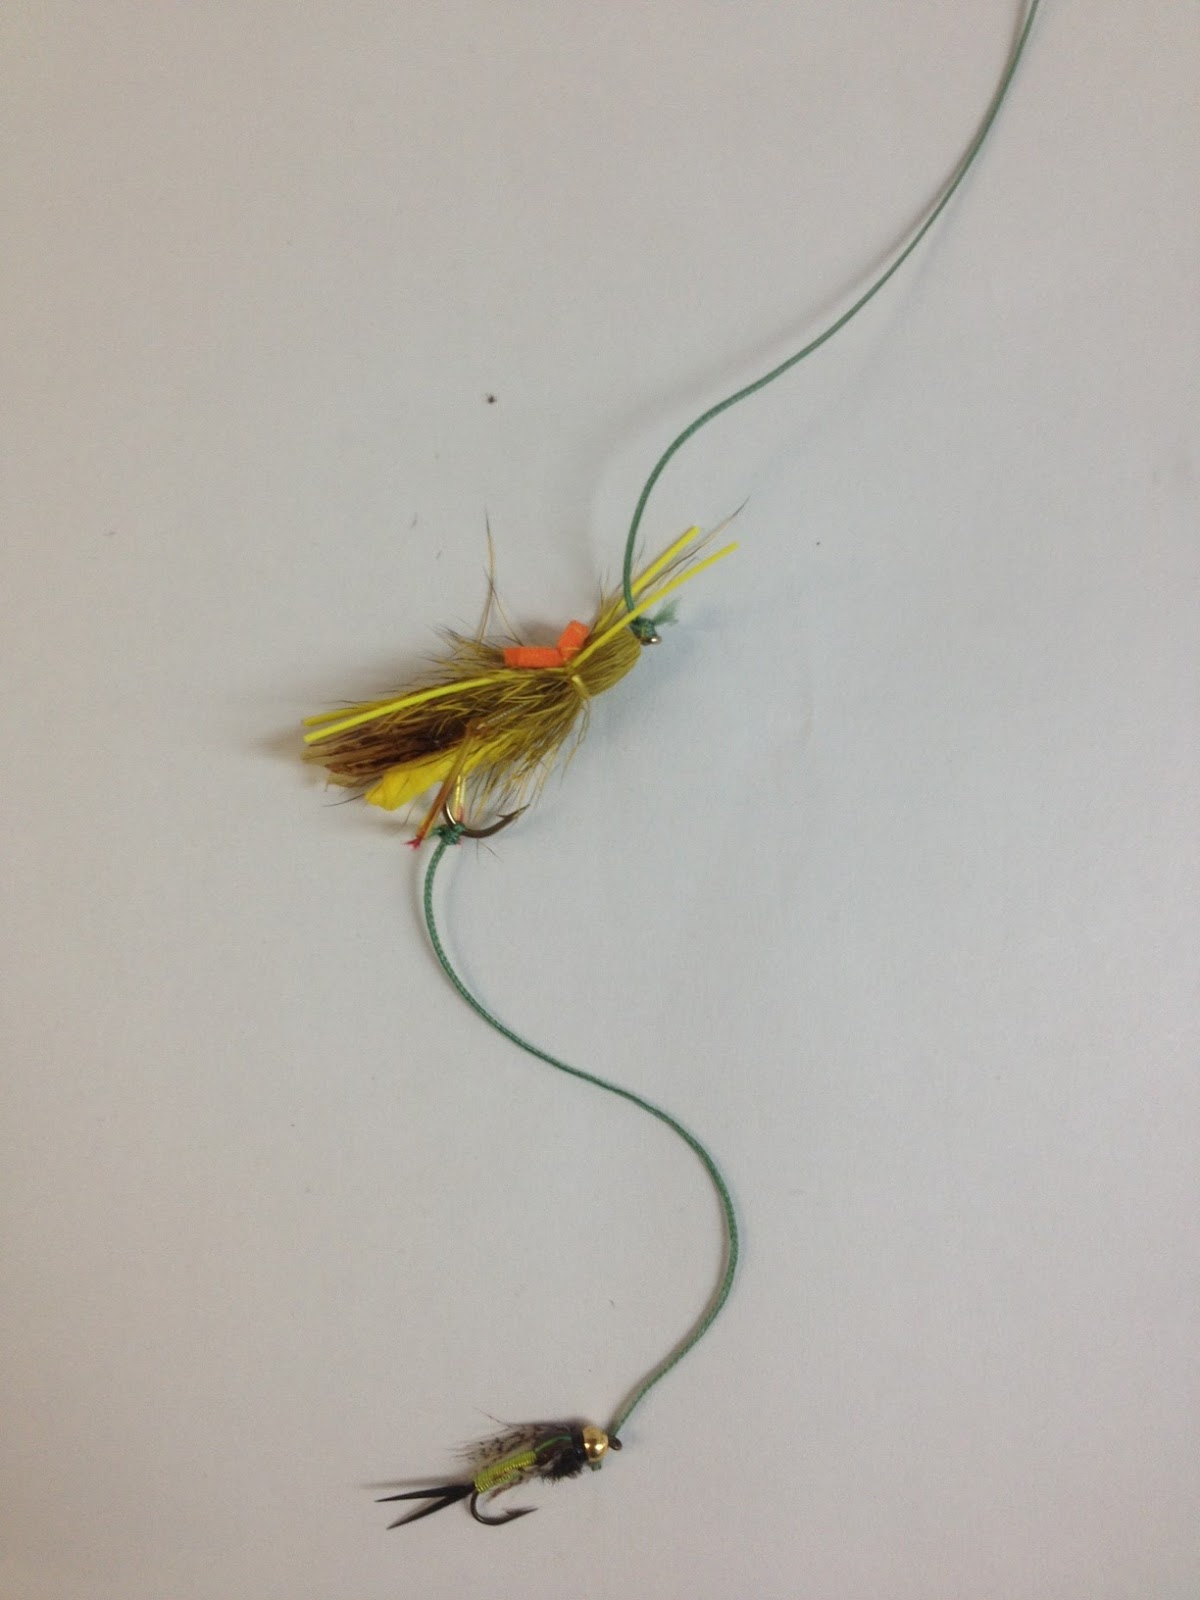 Fish Tandem Flies And Catch More Trout Simpson Fly Fishing, 43% OFF